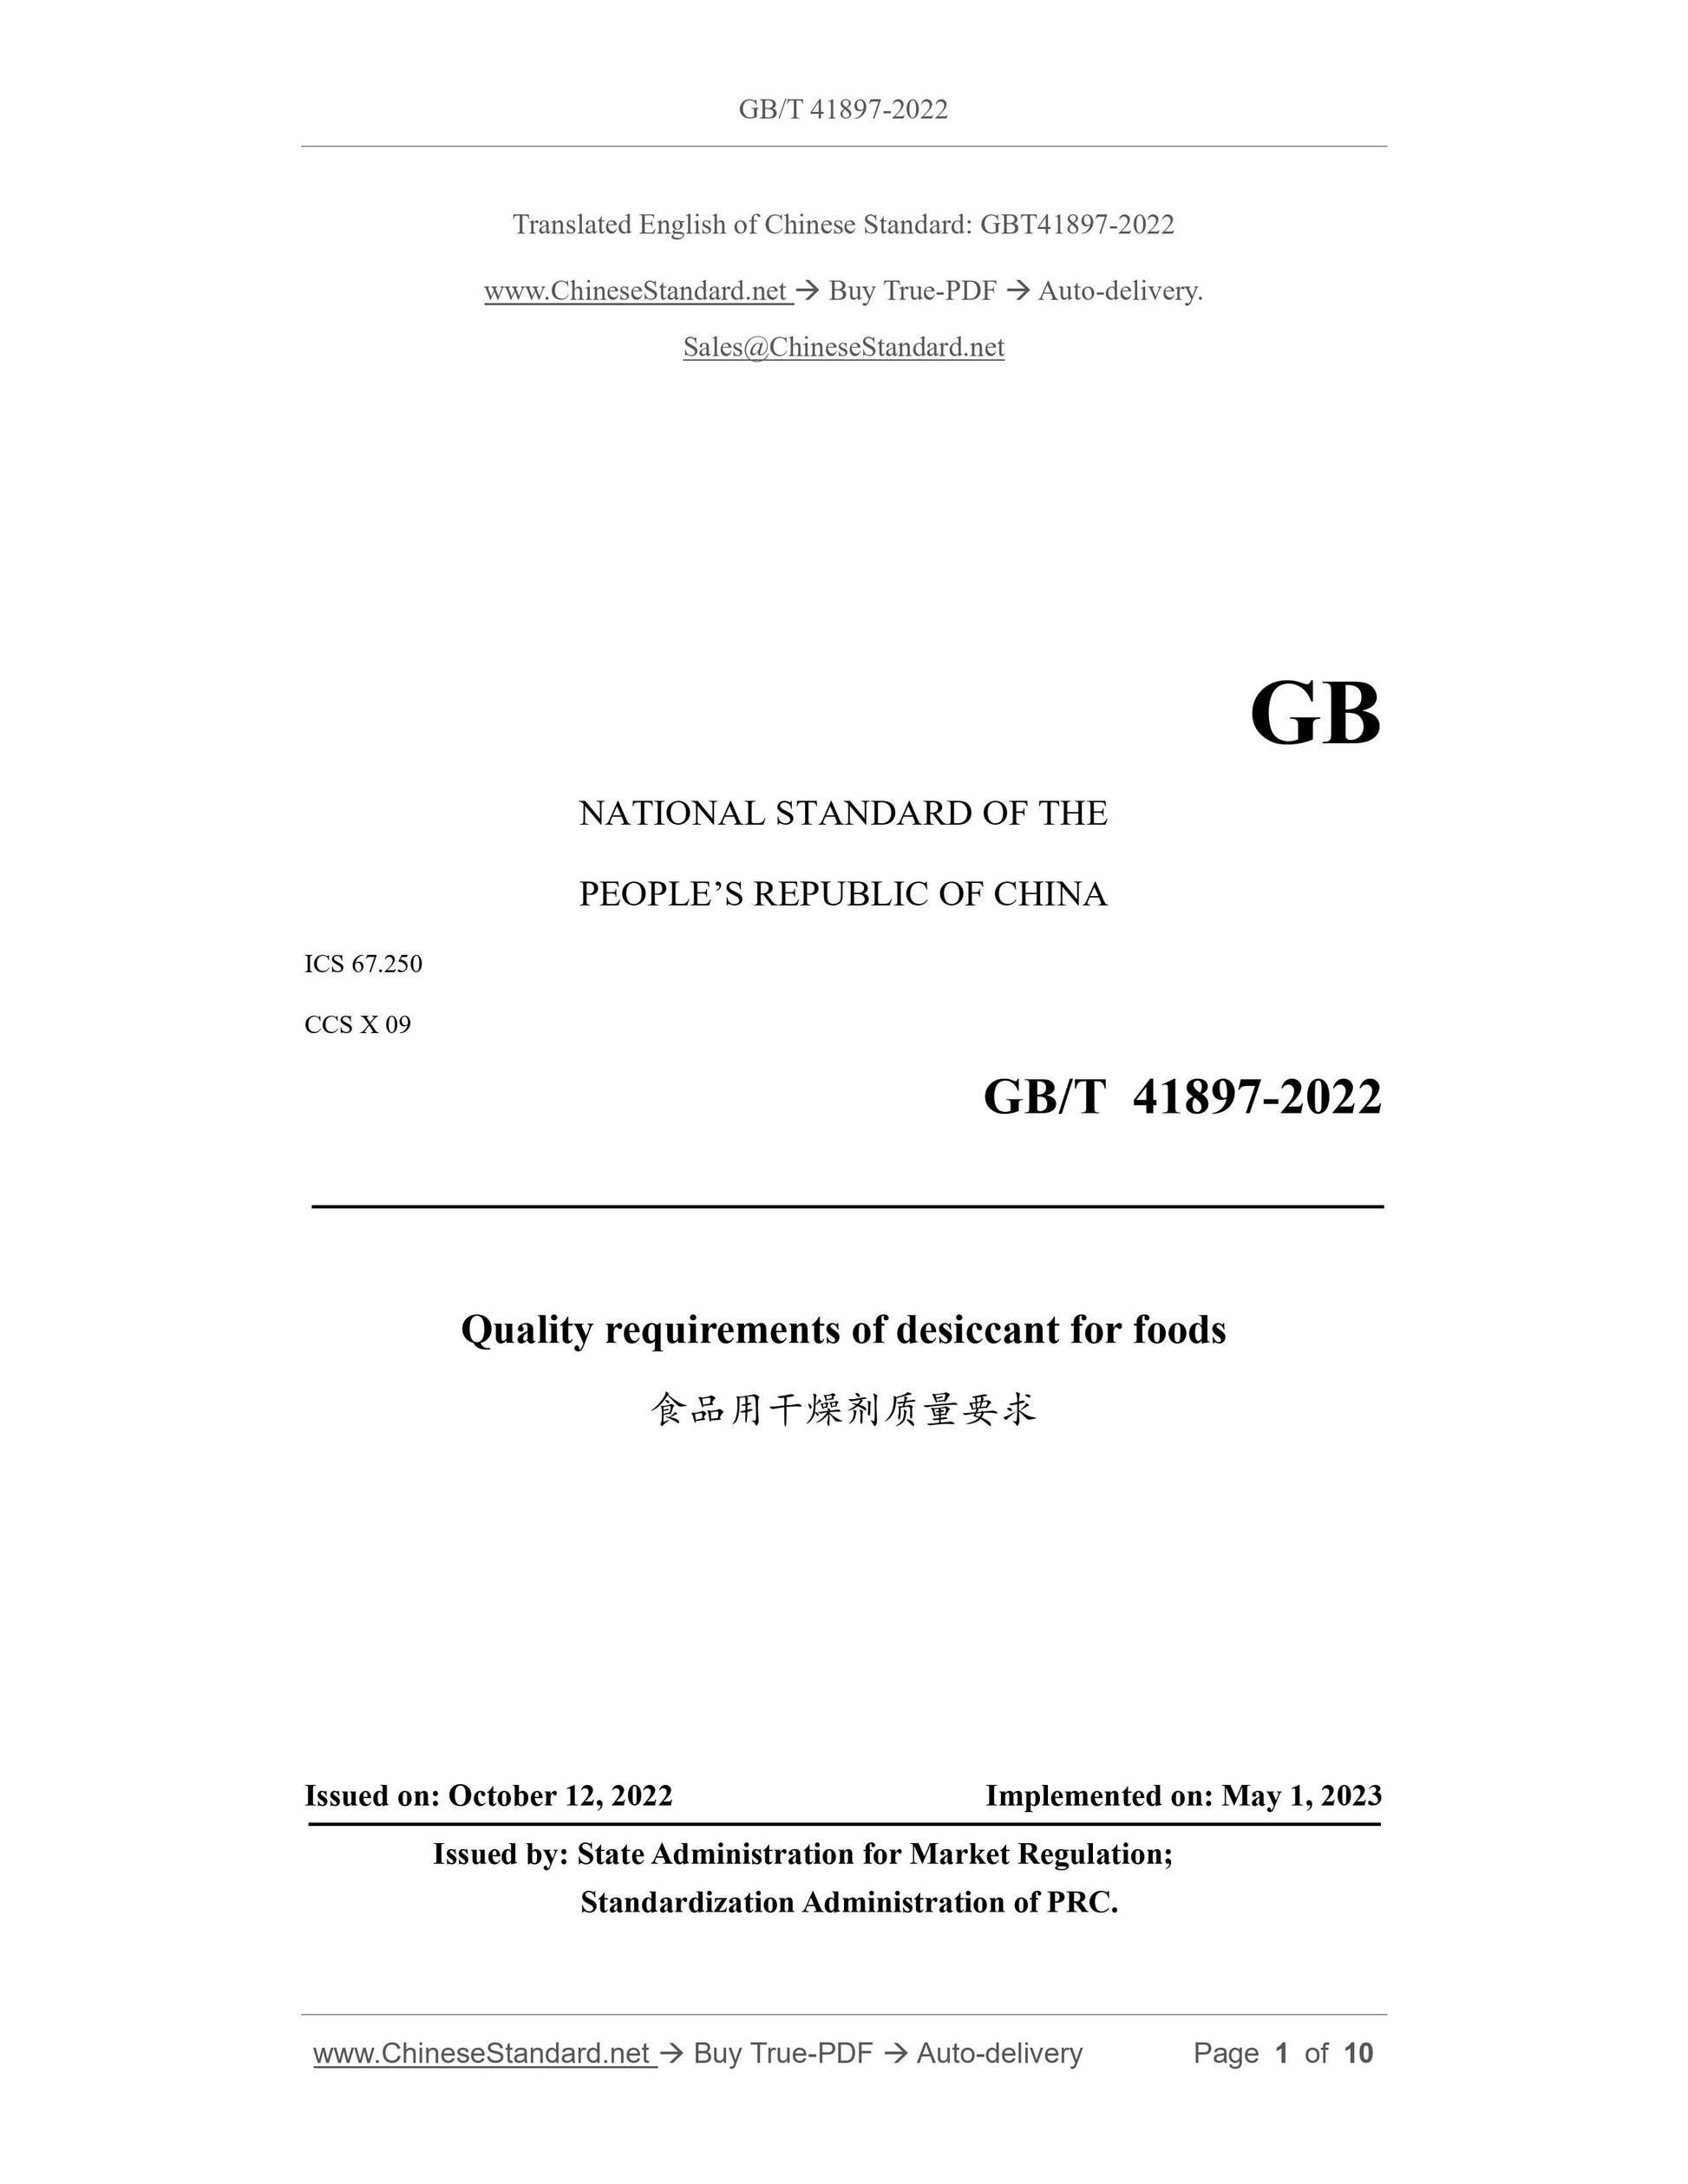 GB/T 41897-2022 Page 1